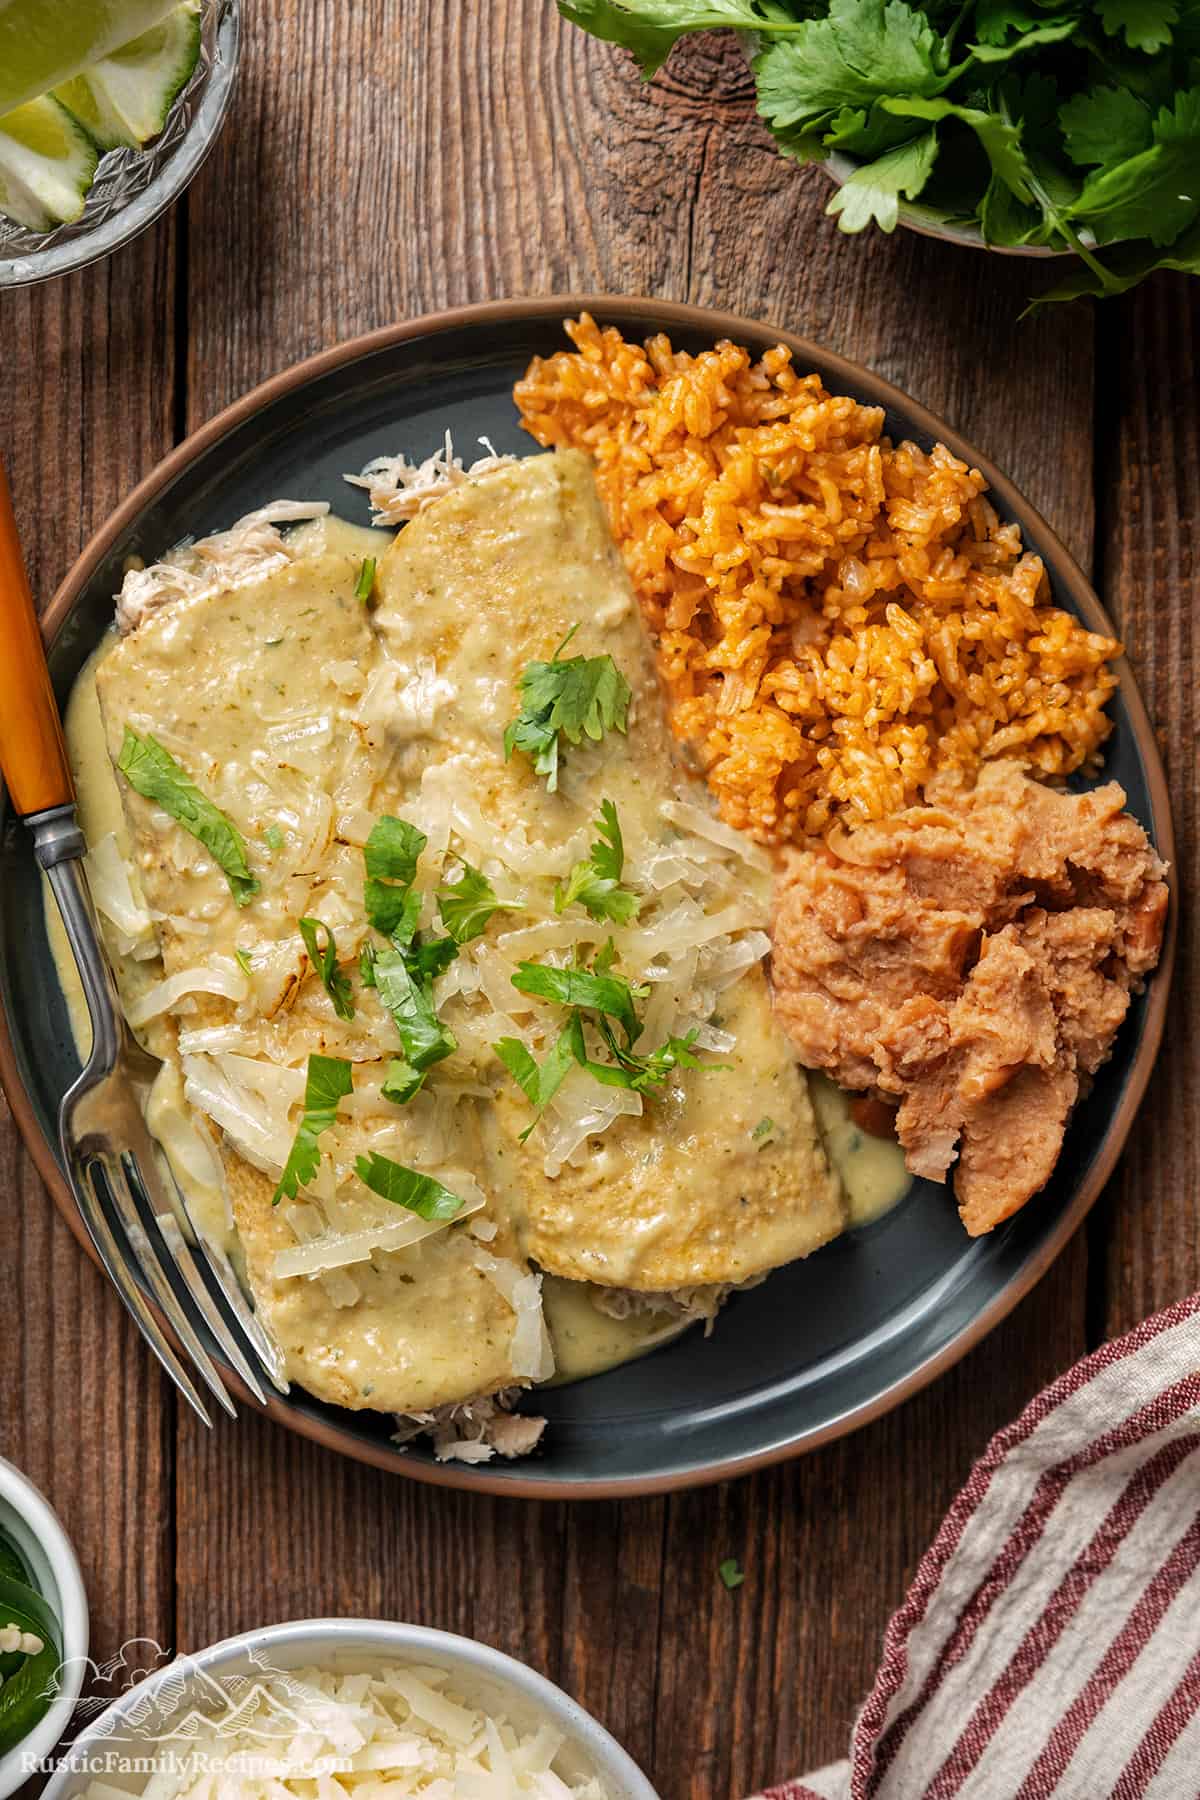 Enchiladas suizas with a side of refried beans and red rice. 